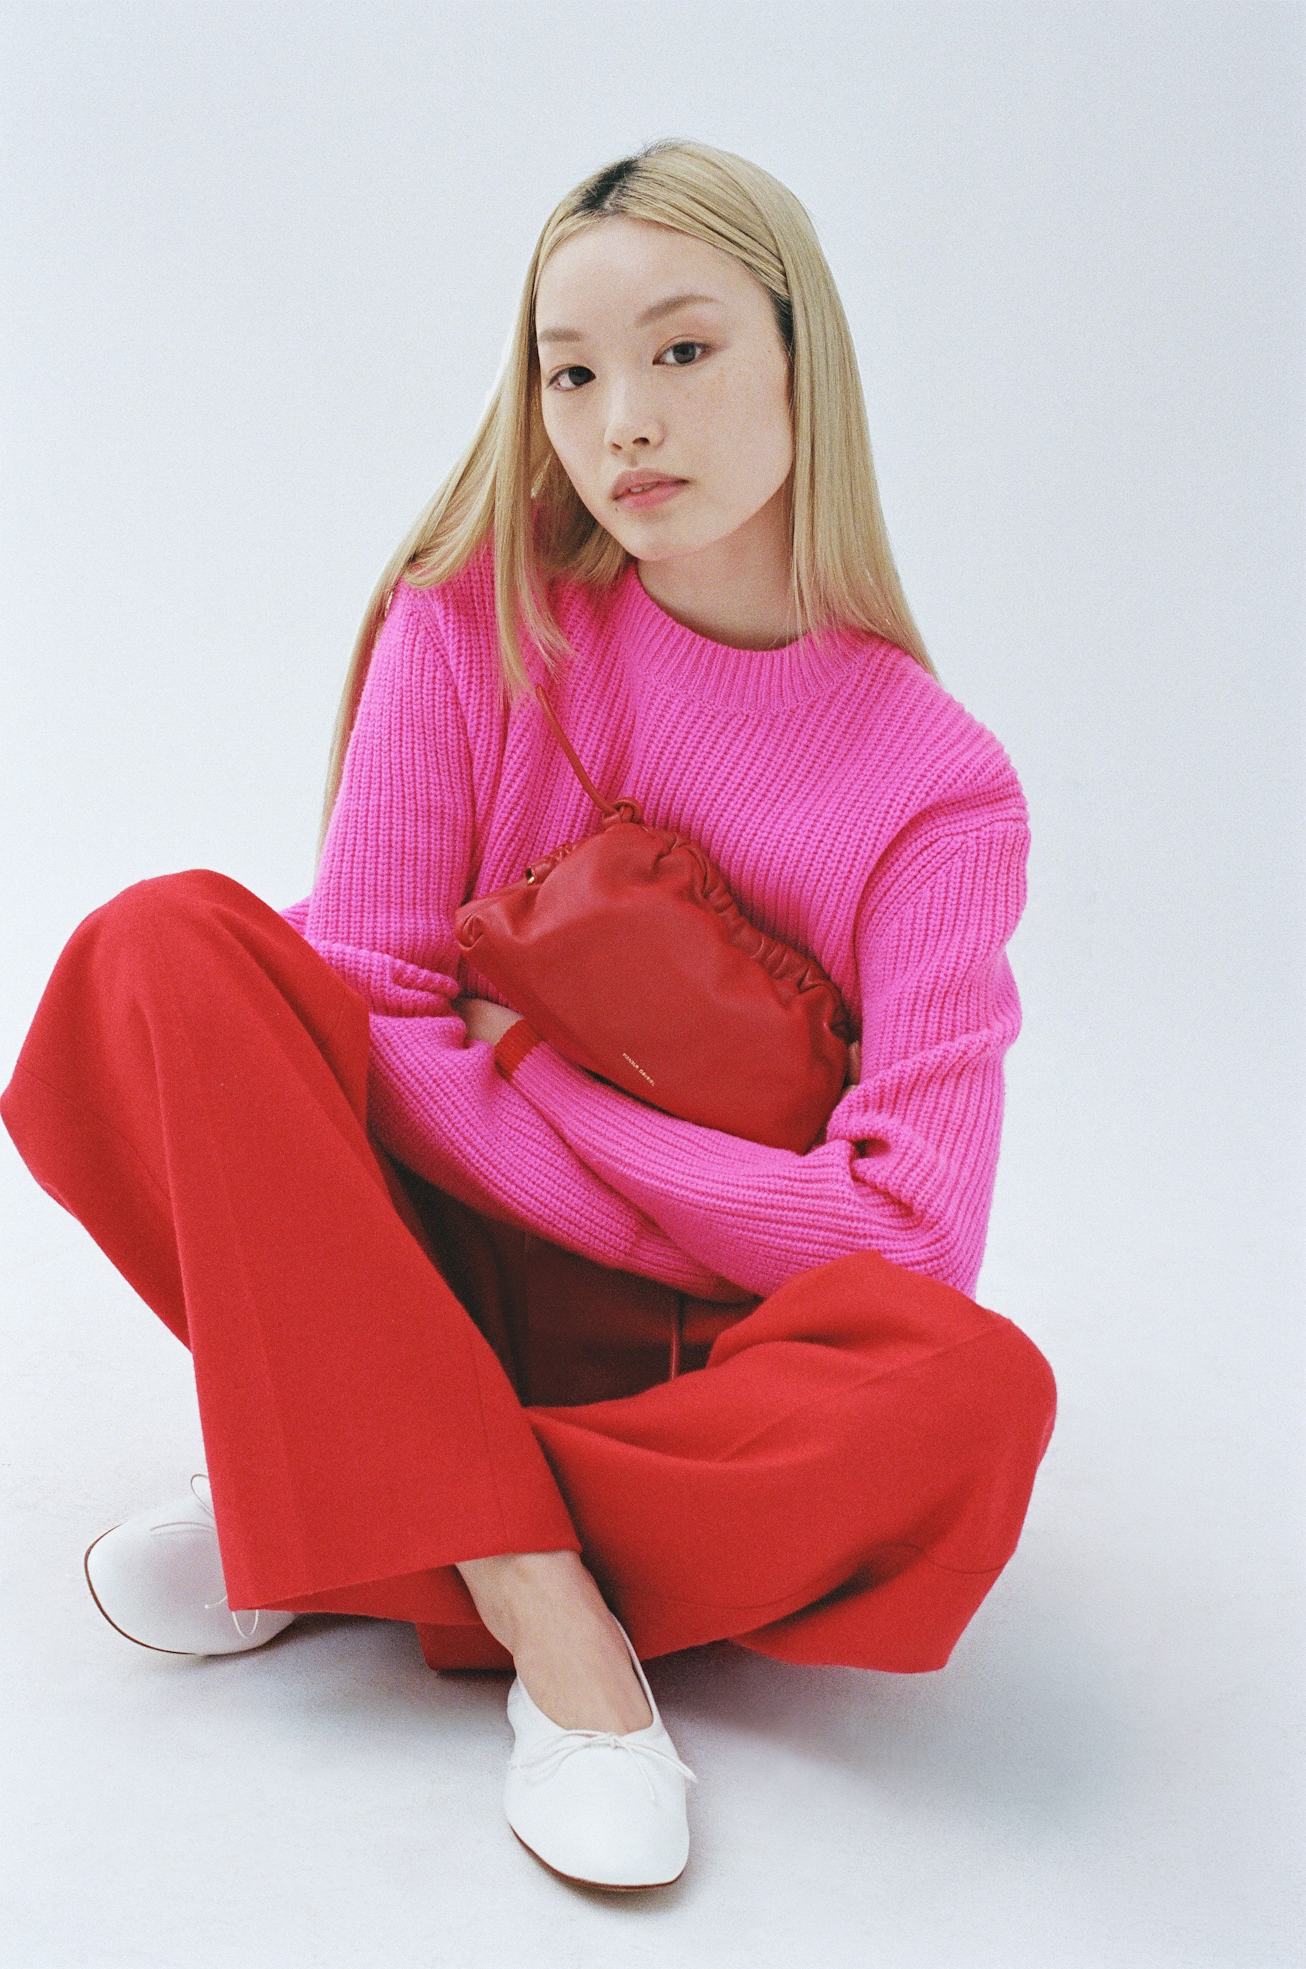 Australian fashion model Fernanda Ly sitting down wearing a pink sweater and red pants while holding...